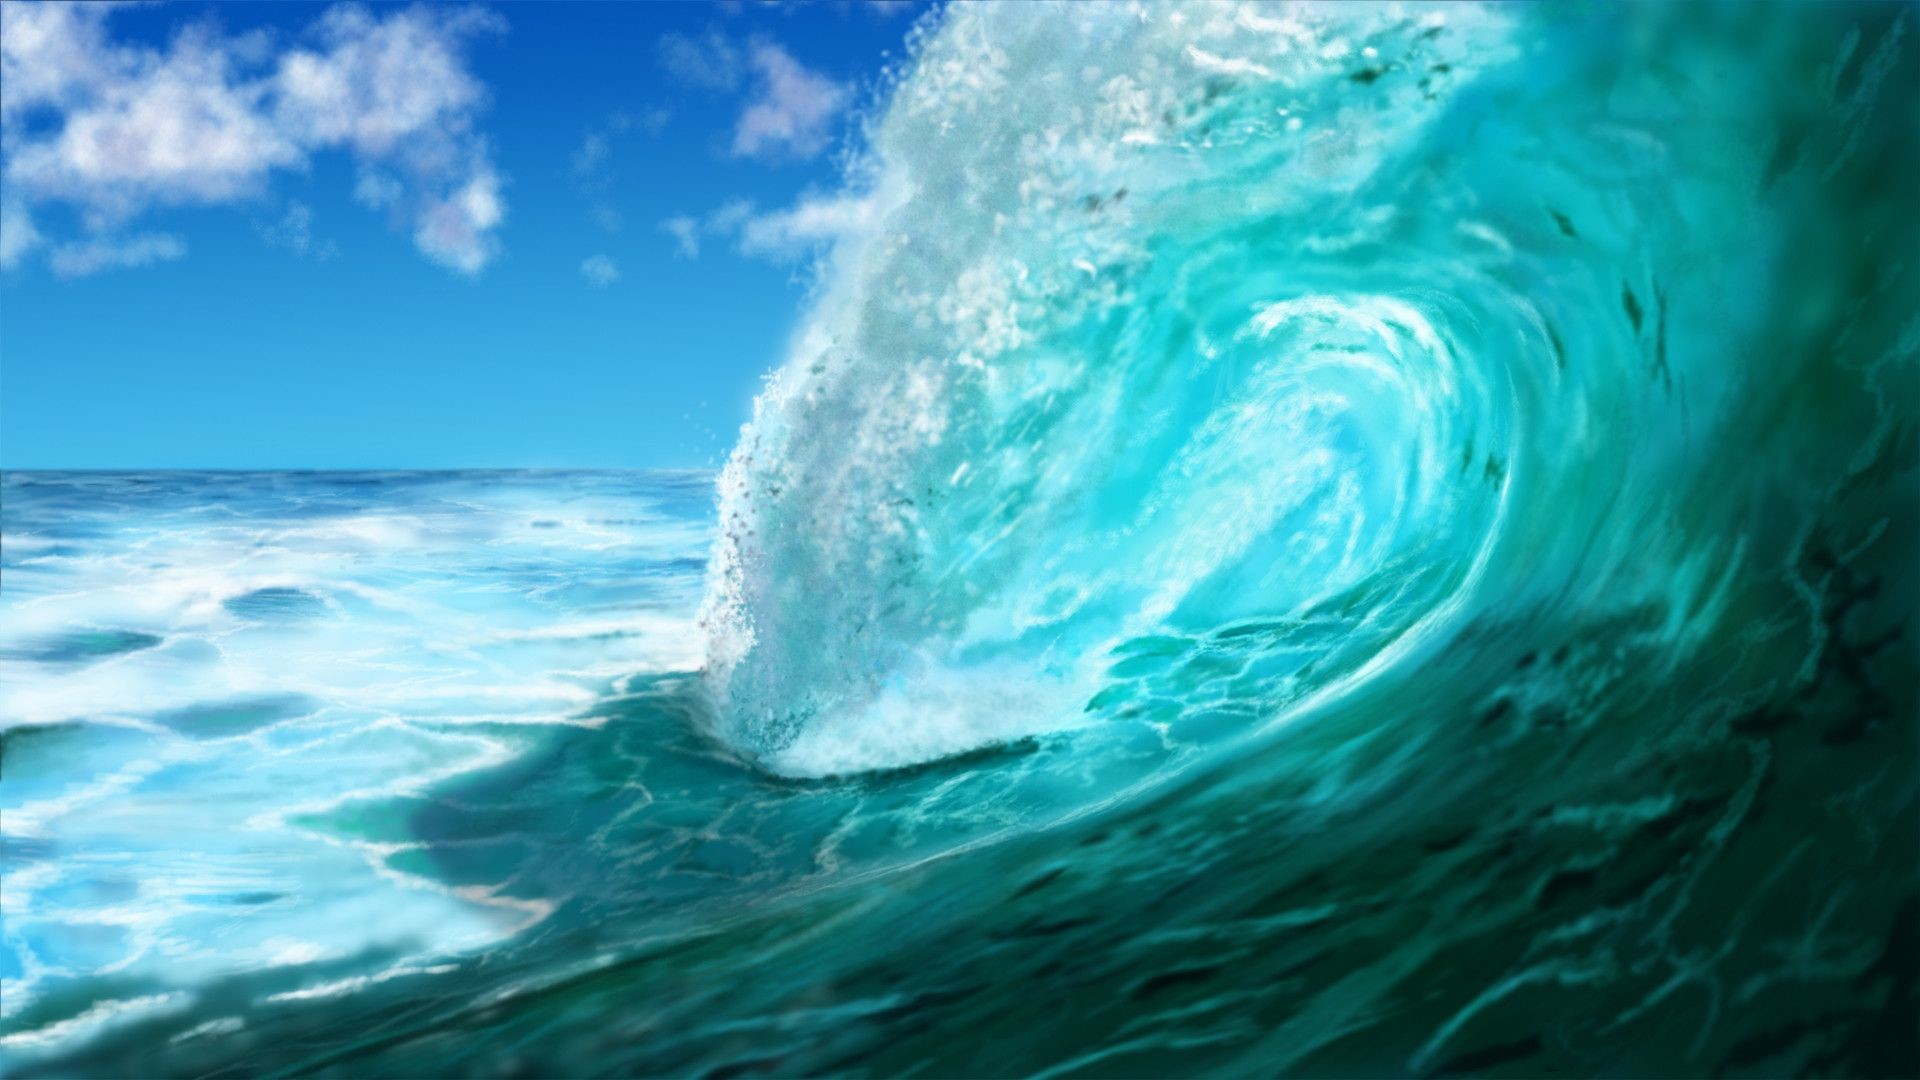 Moving Waves Wallpaper (76+ images)